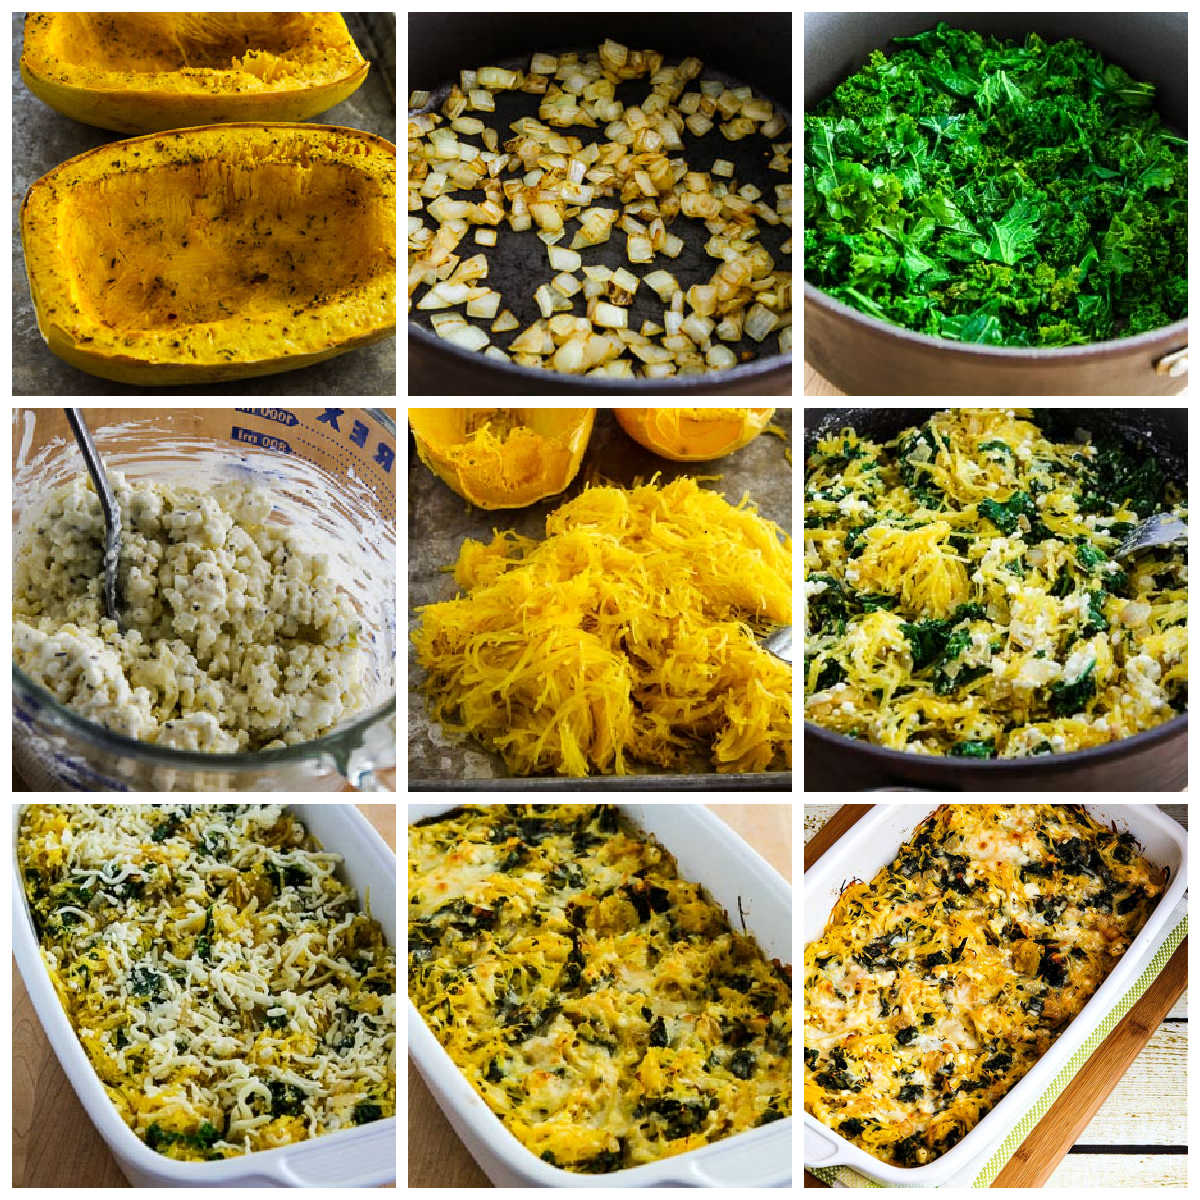 Twice-Baked Spaghetti Squash with Kale collage of recipe steps.